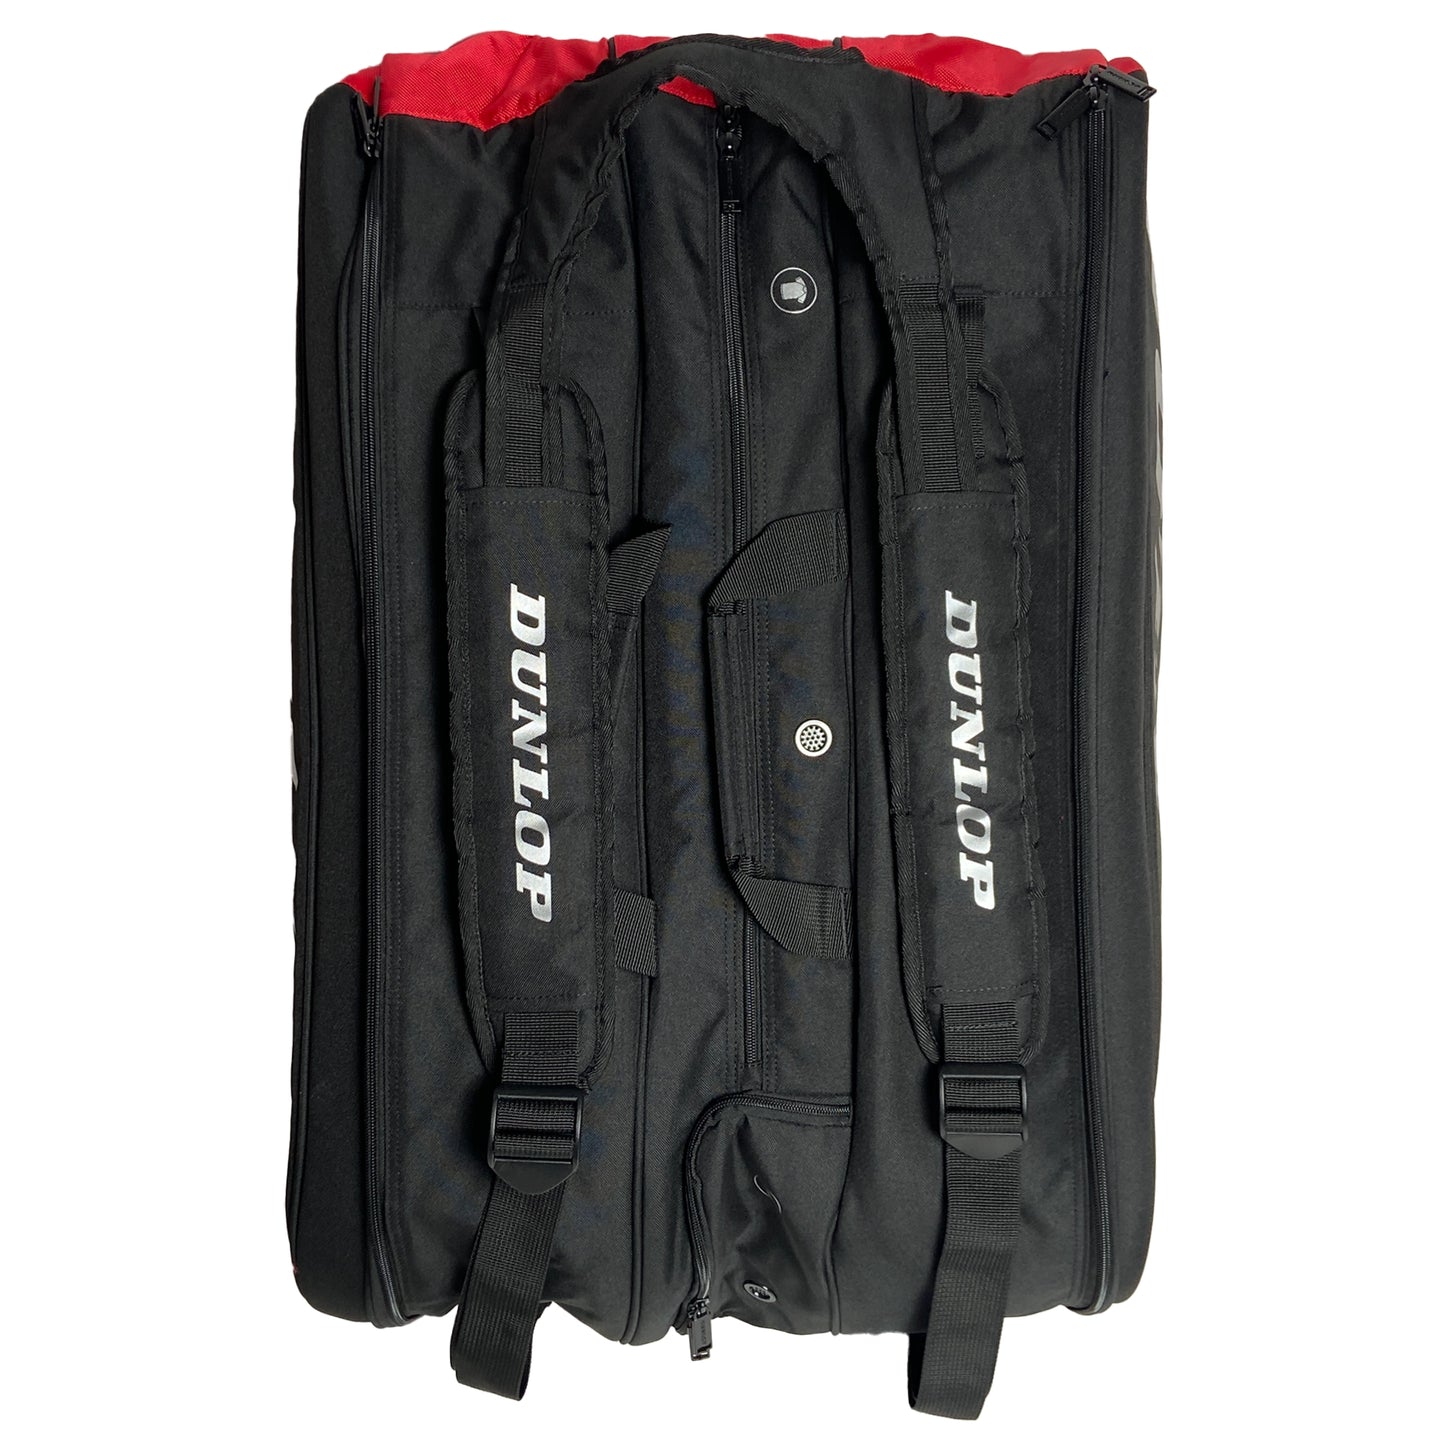 Dunlop CX Performance Thermo 12R Bag Black/ Red